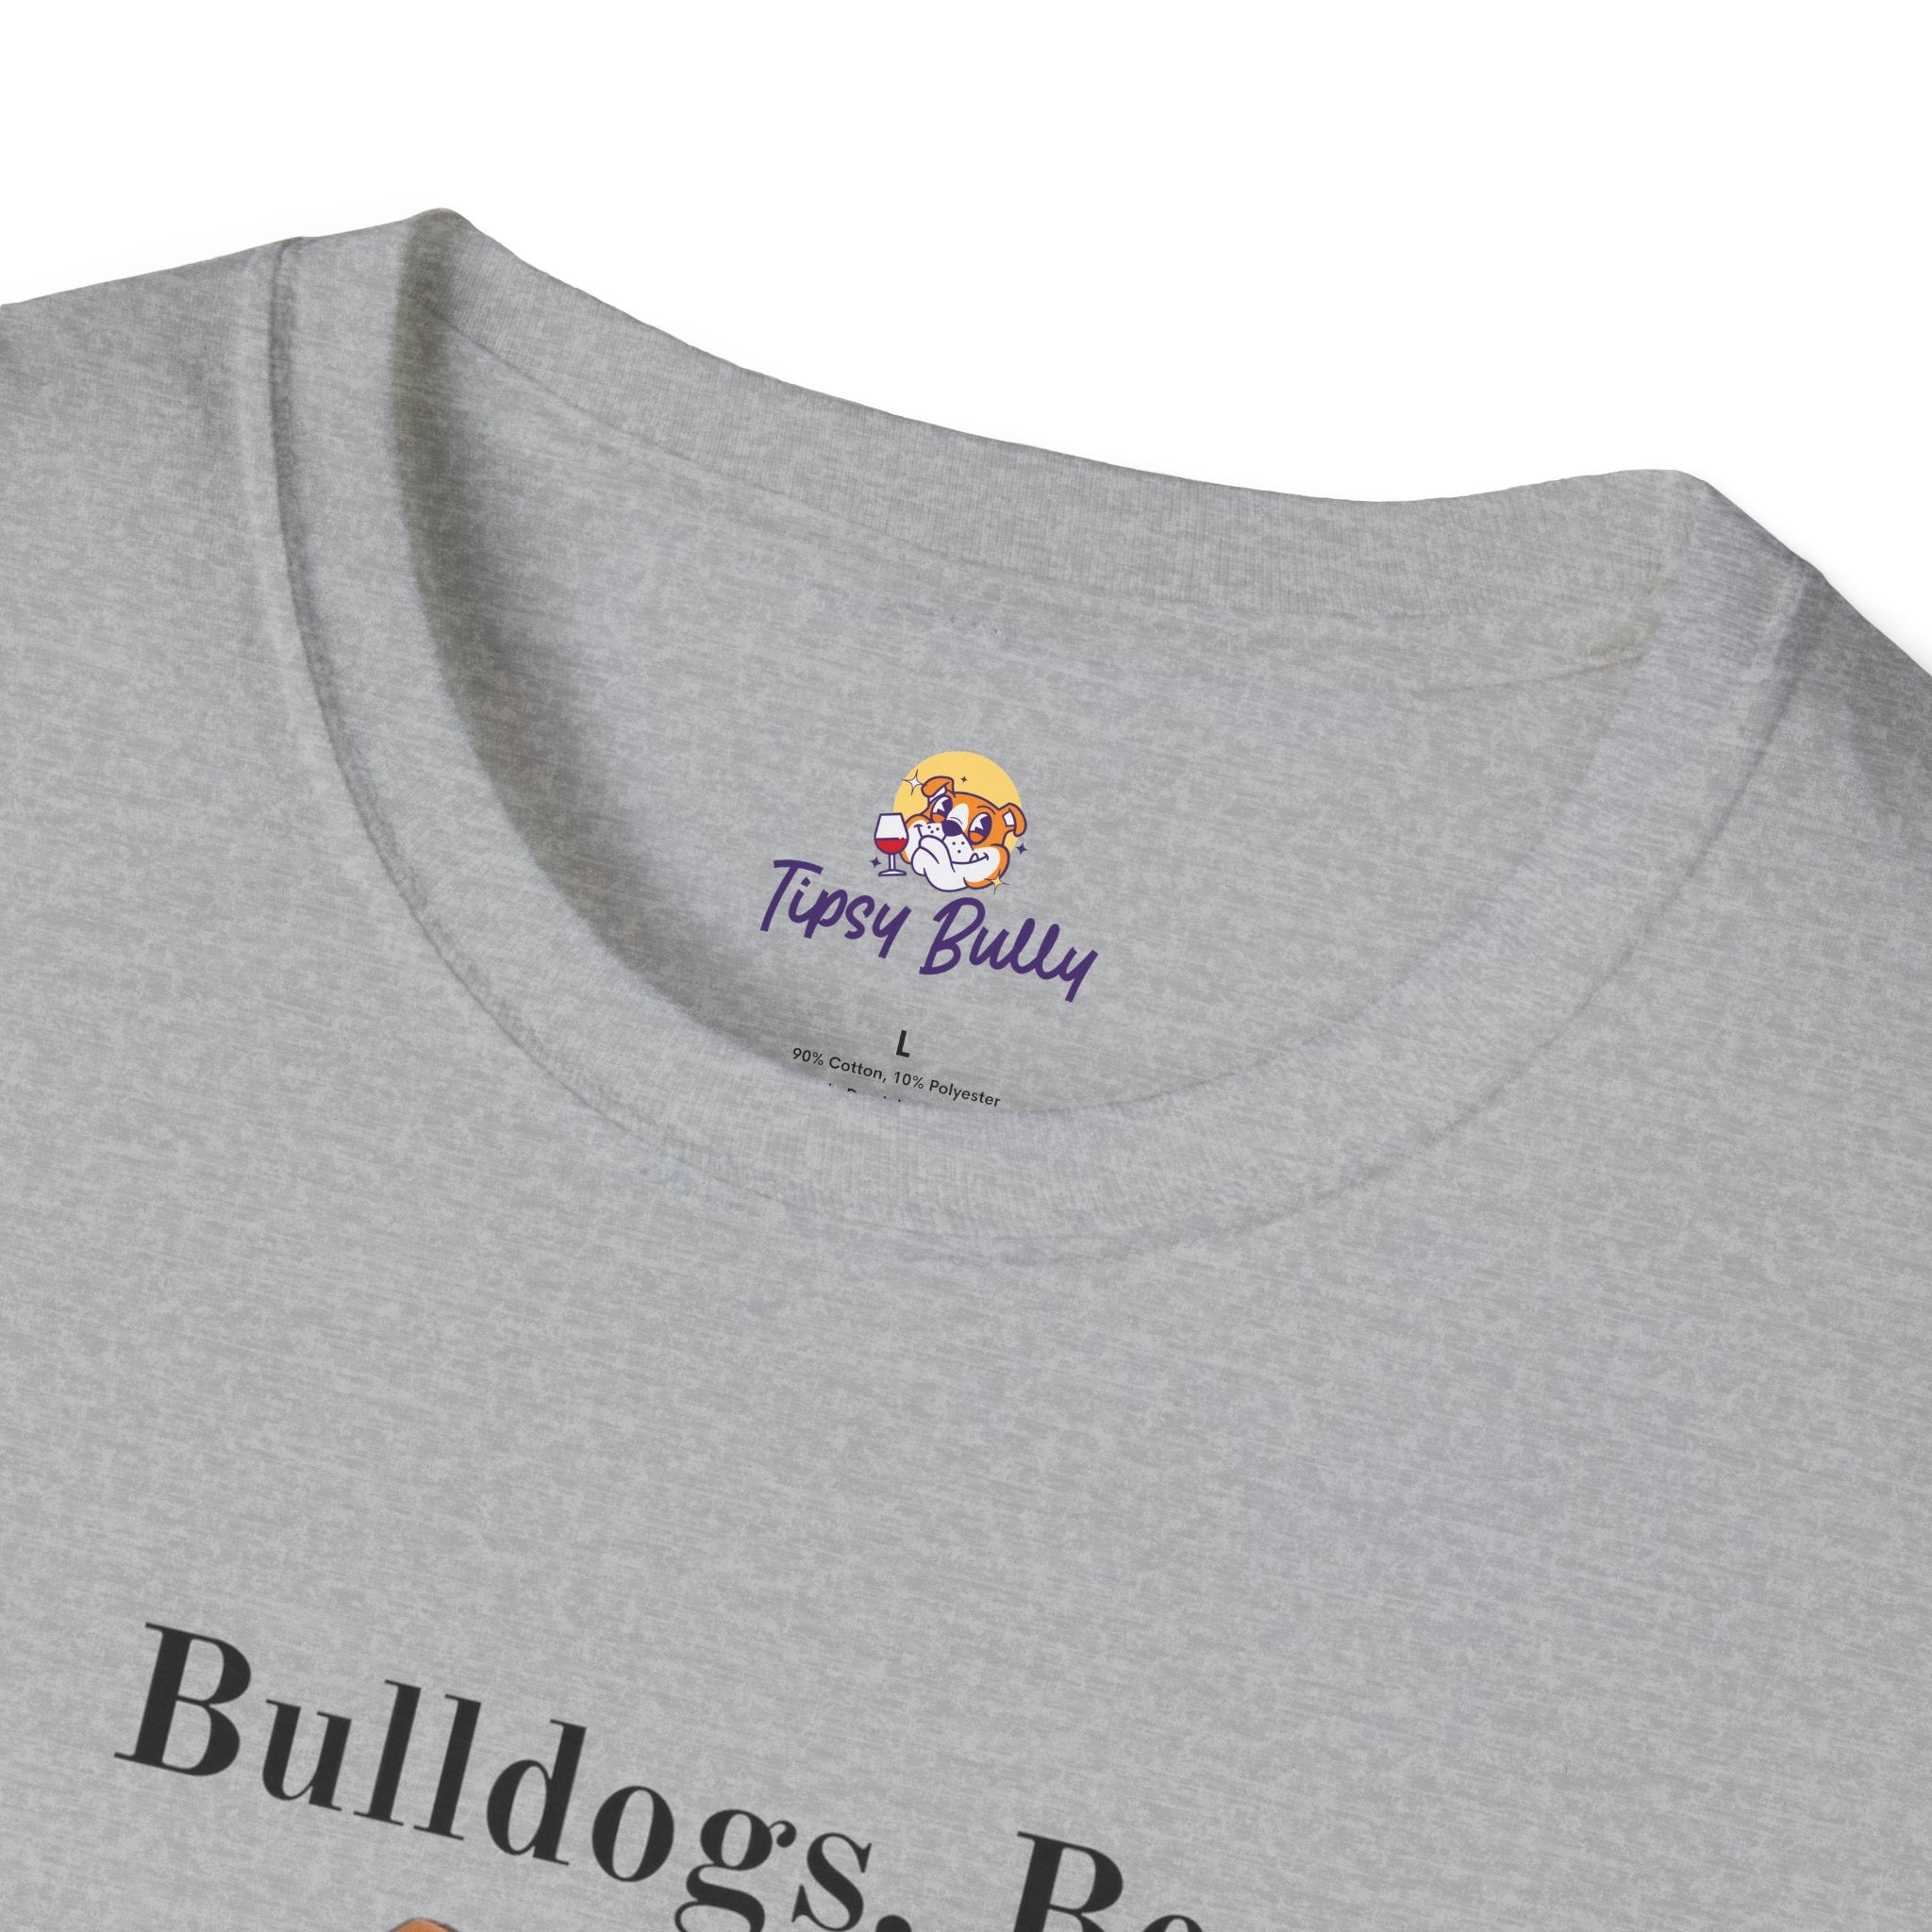 Bulldogs, Beer, and Bad Decisions" Unisex T-Shirt by Tipsy Bully (American/White)